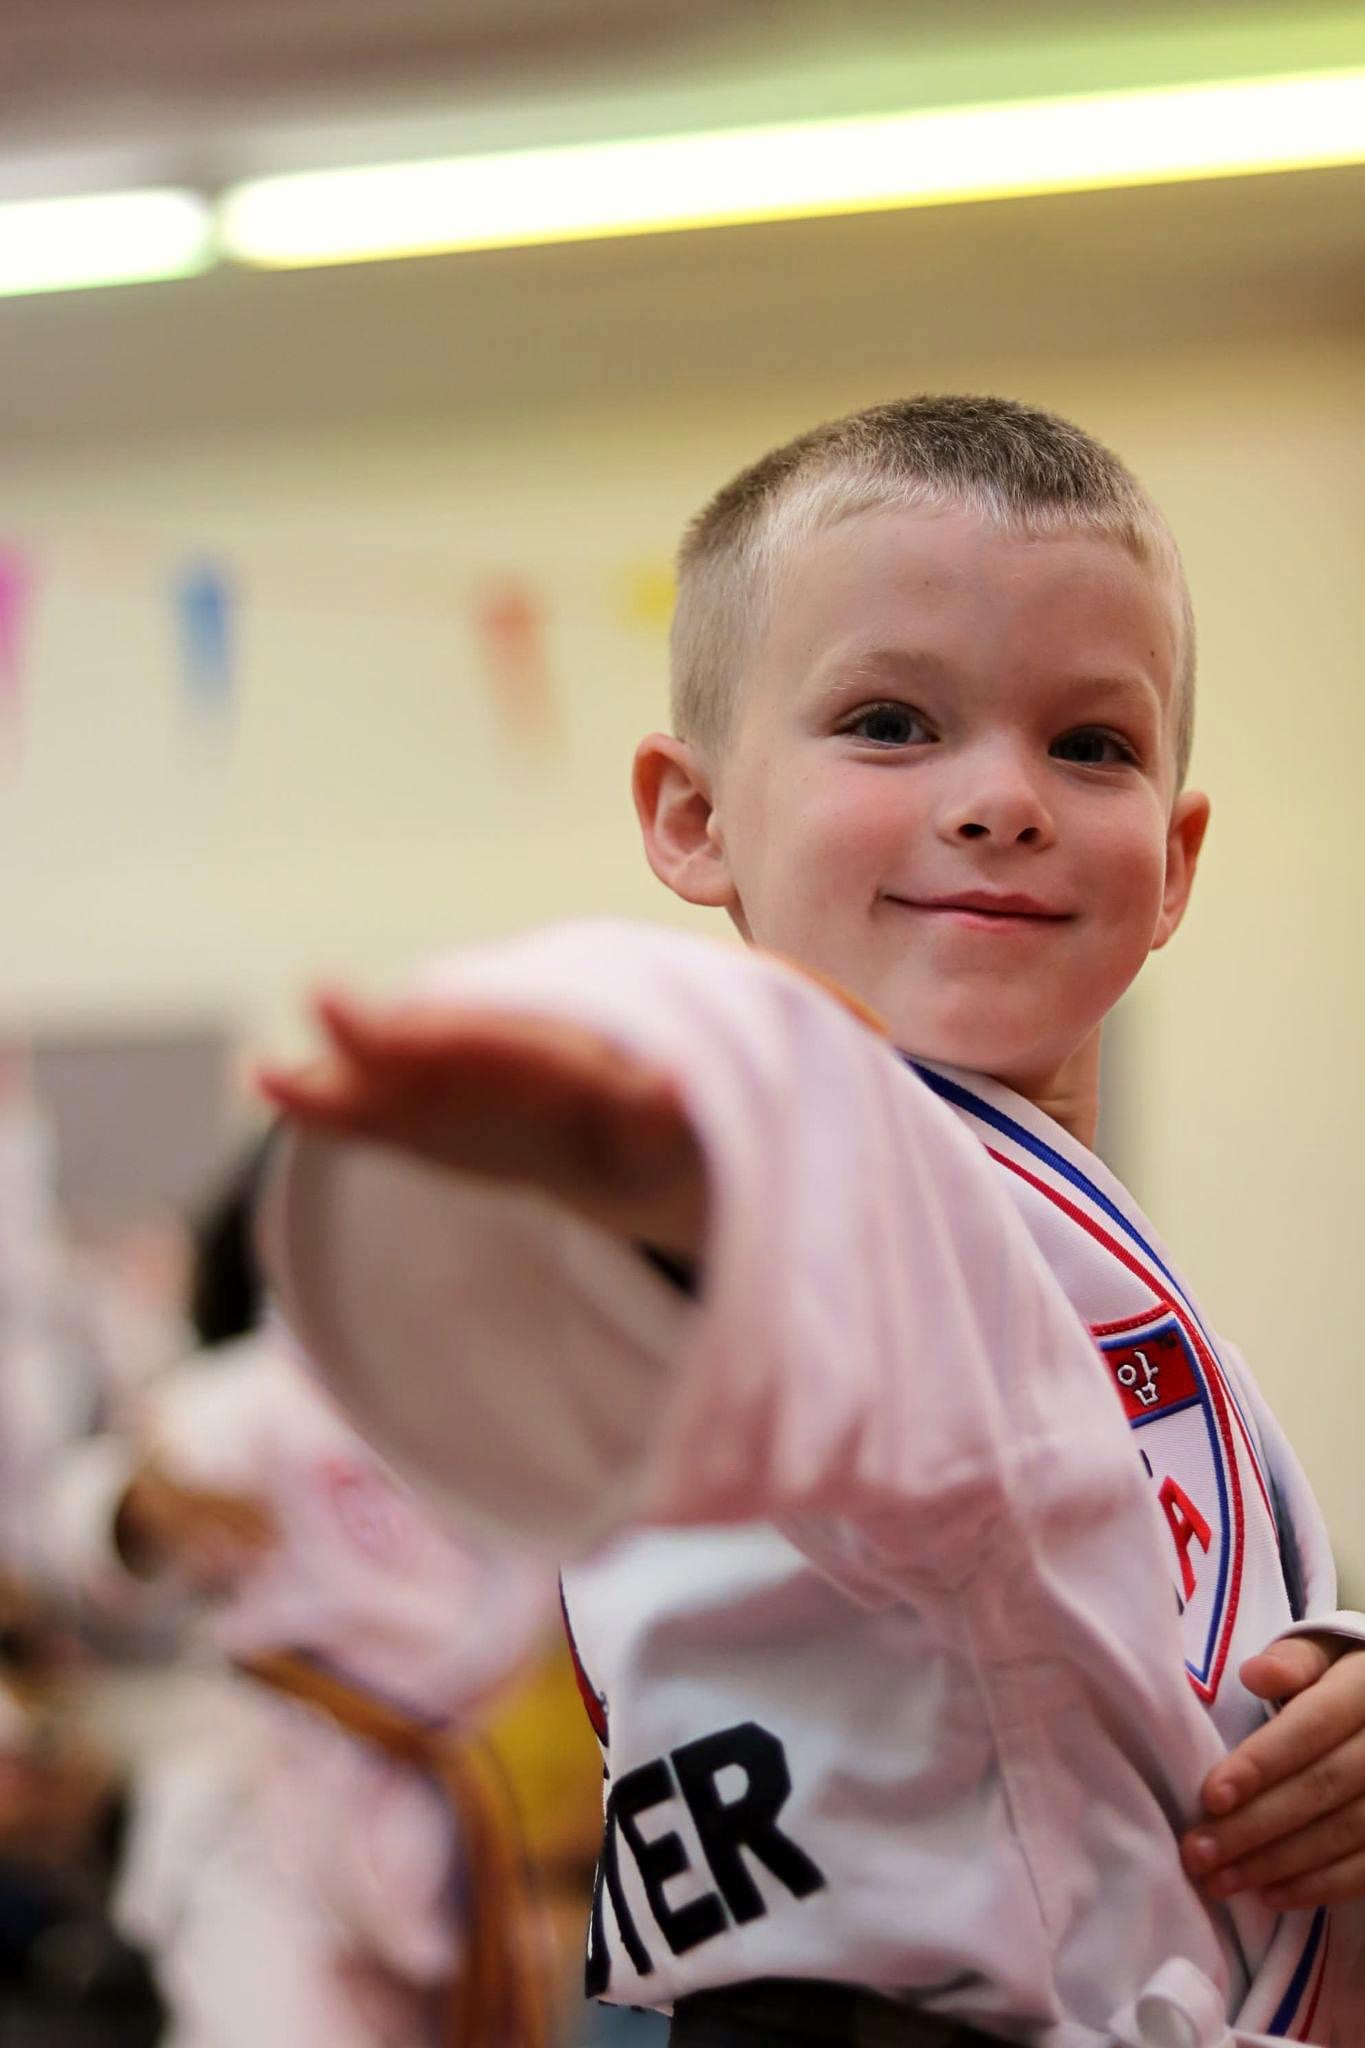 7 Benefits of Martial Arts for Kids